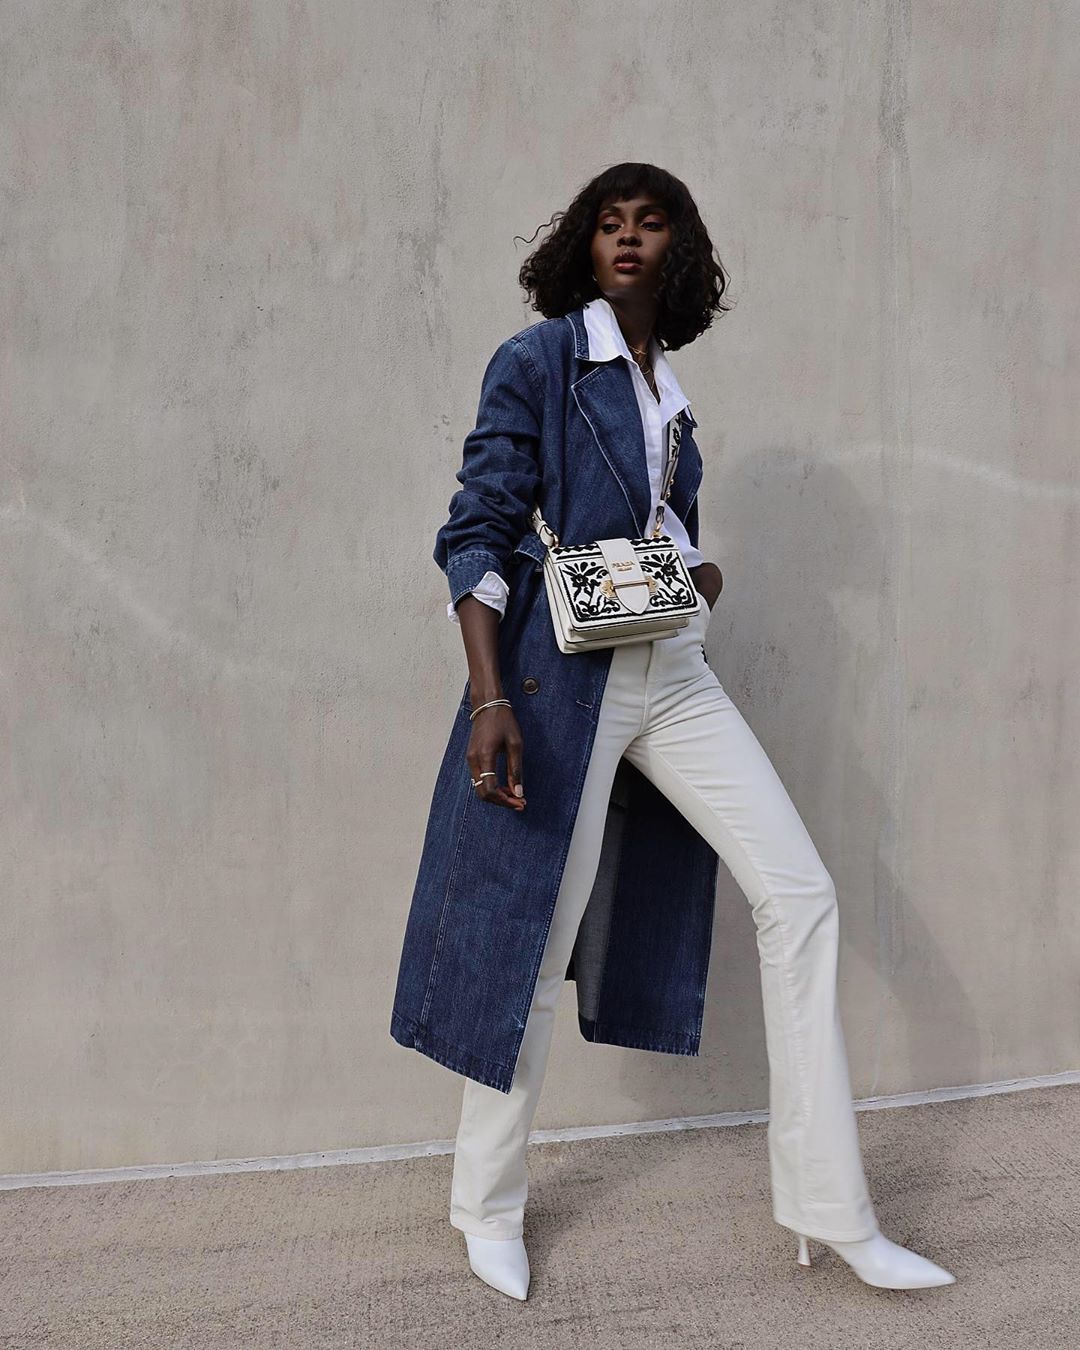 J BRAND - Walk this way 🎶 @lefevrediary in the Runway Trouser in a cream-colored corduroy paired with our Palmer Relaxed Button Down and Billie Trench Coat #inmyjbrand